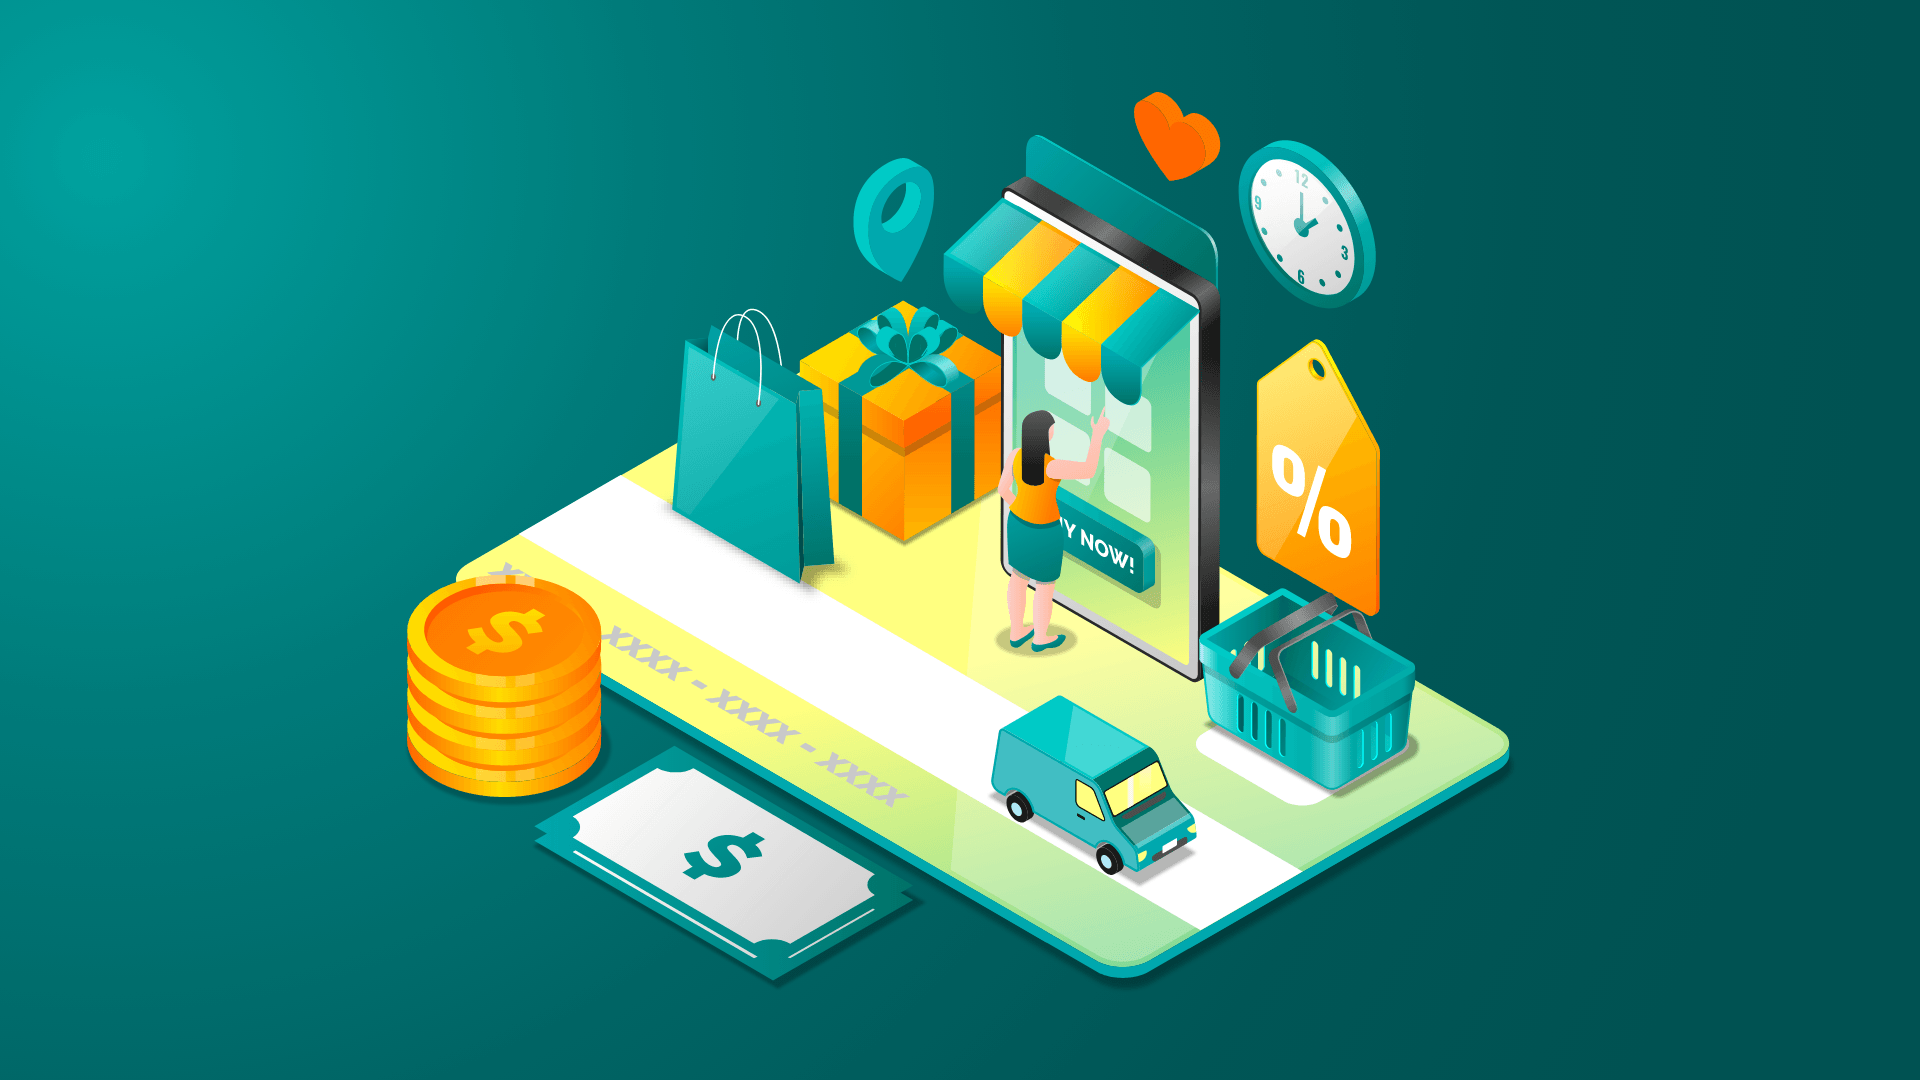 shopify-expensive-apps-article-illustration-integromat